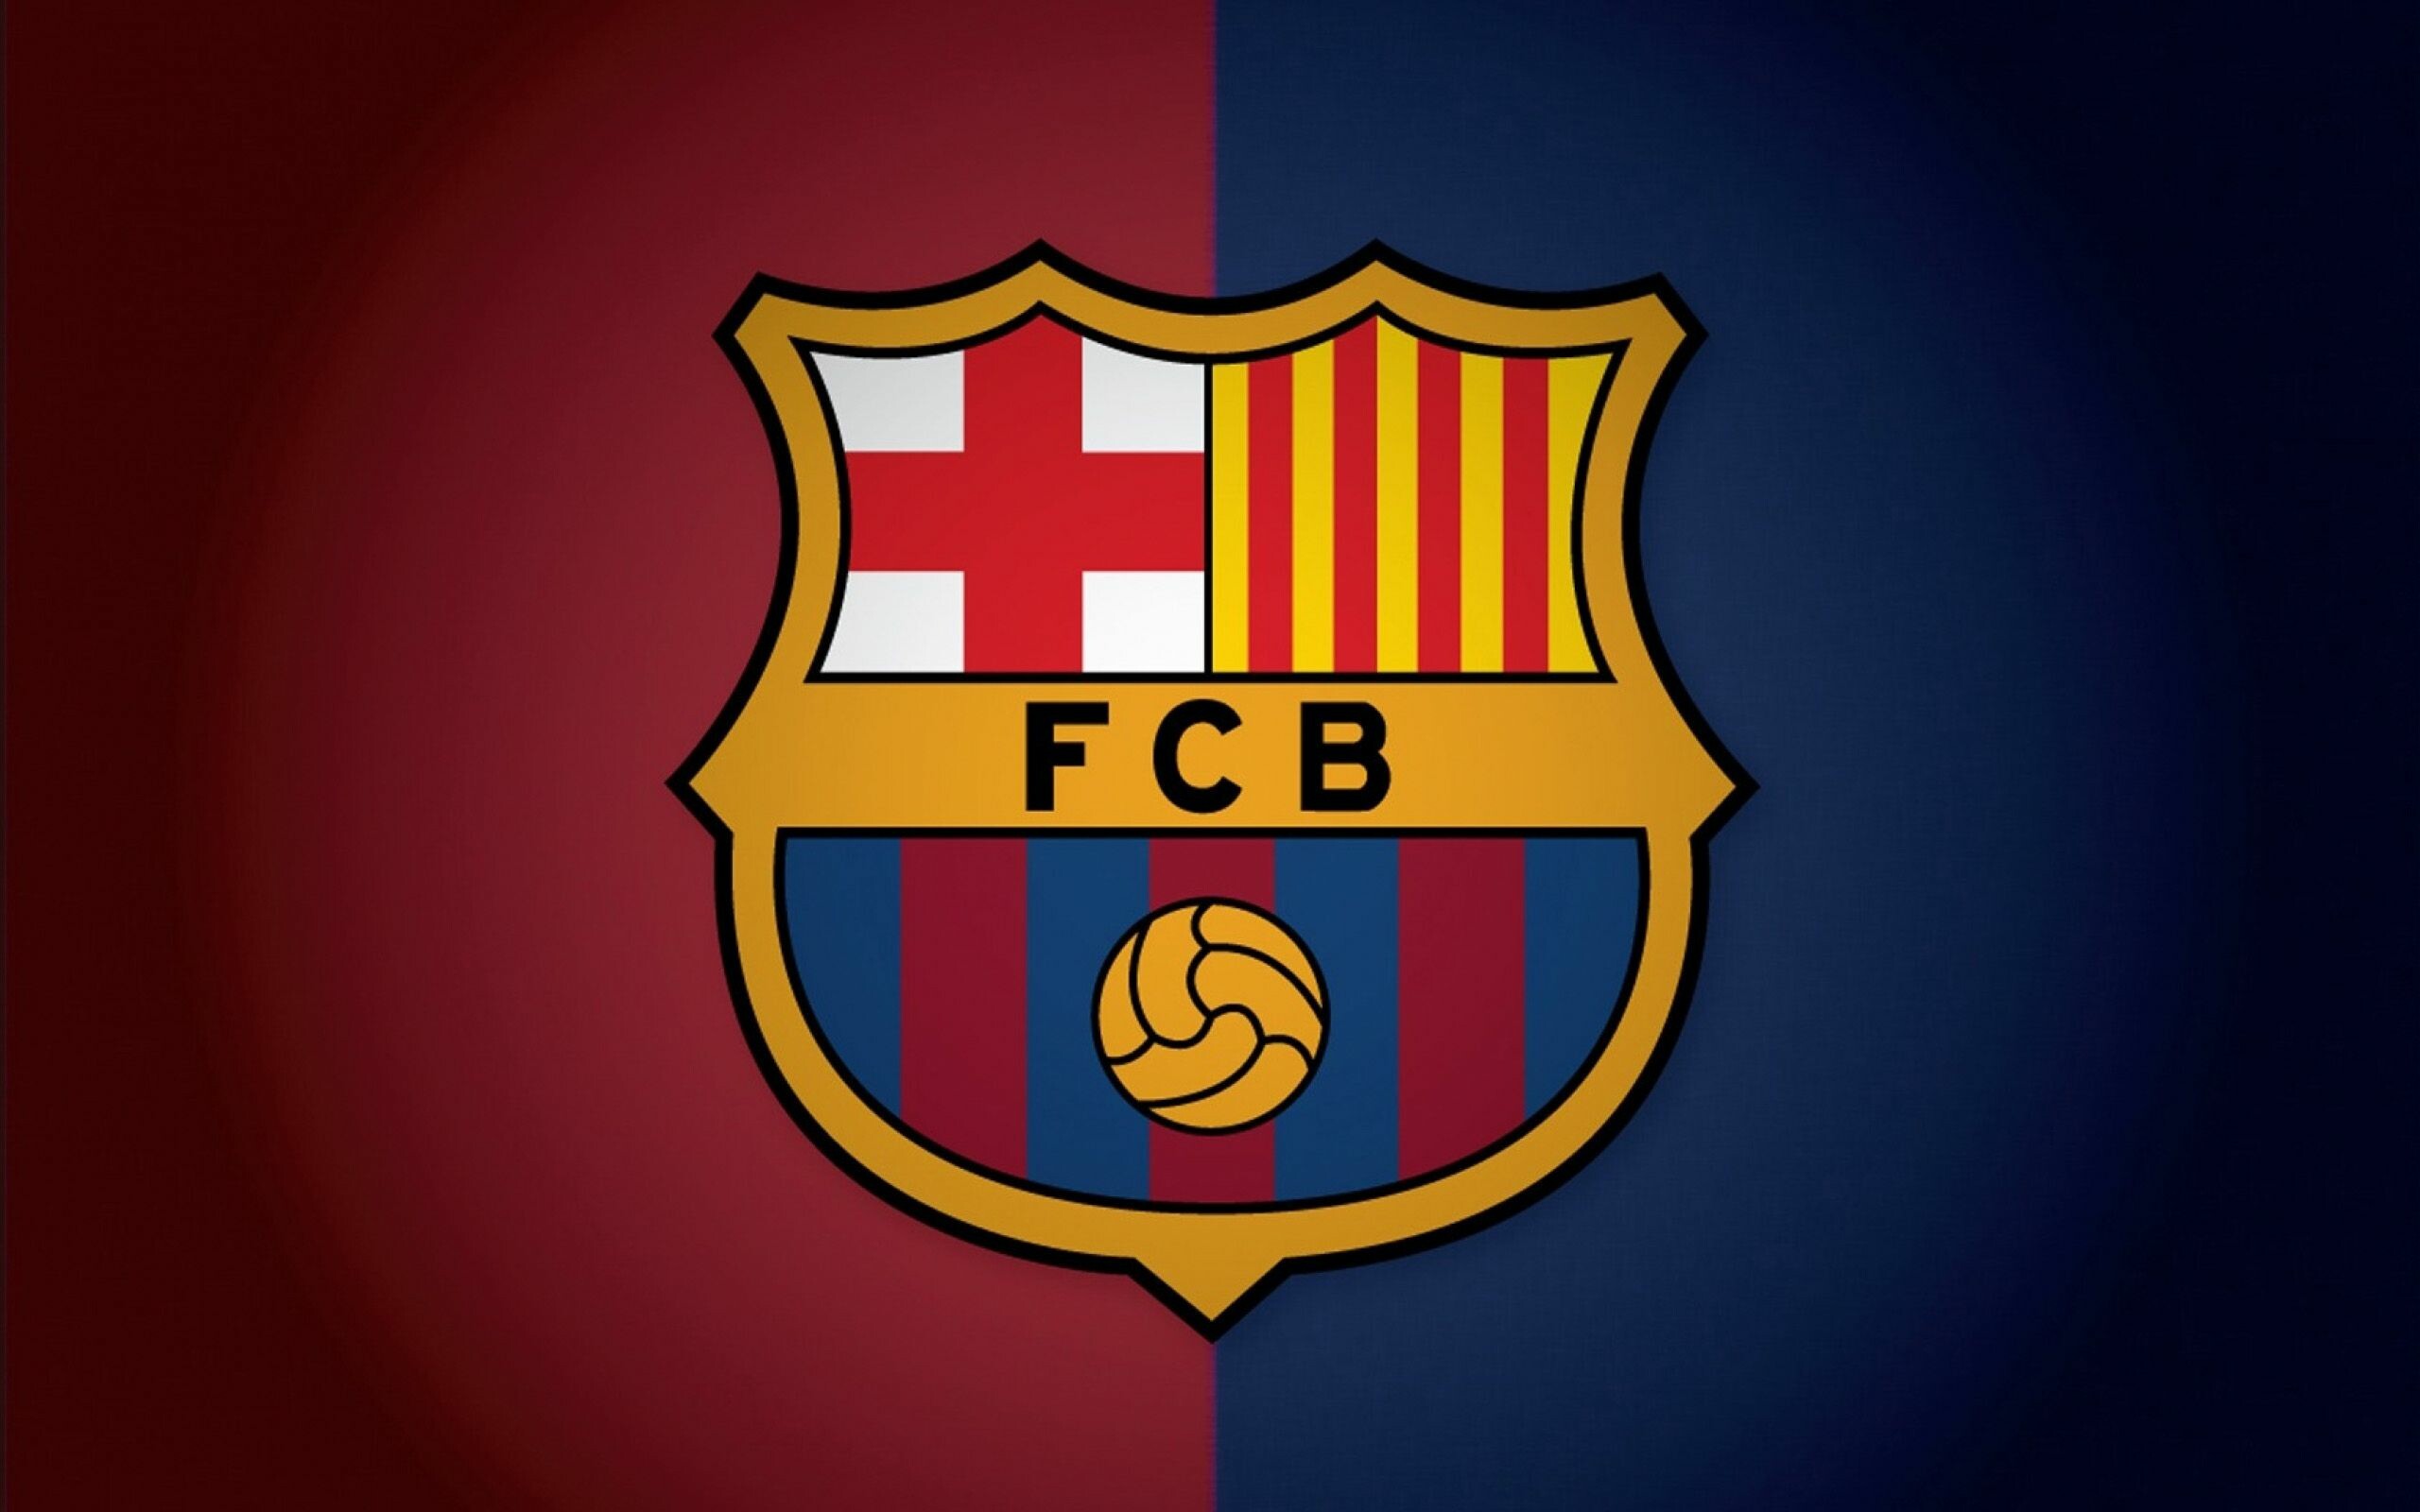 FC Barcelona: The second largest sports club in the world, "Cant del Barca". 2560x1600 HD Wallpaper.